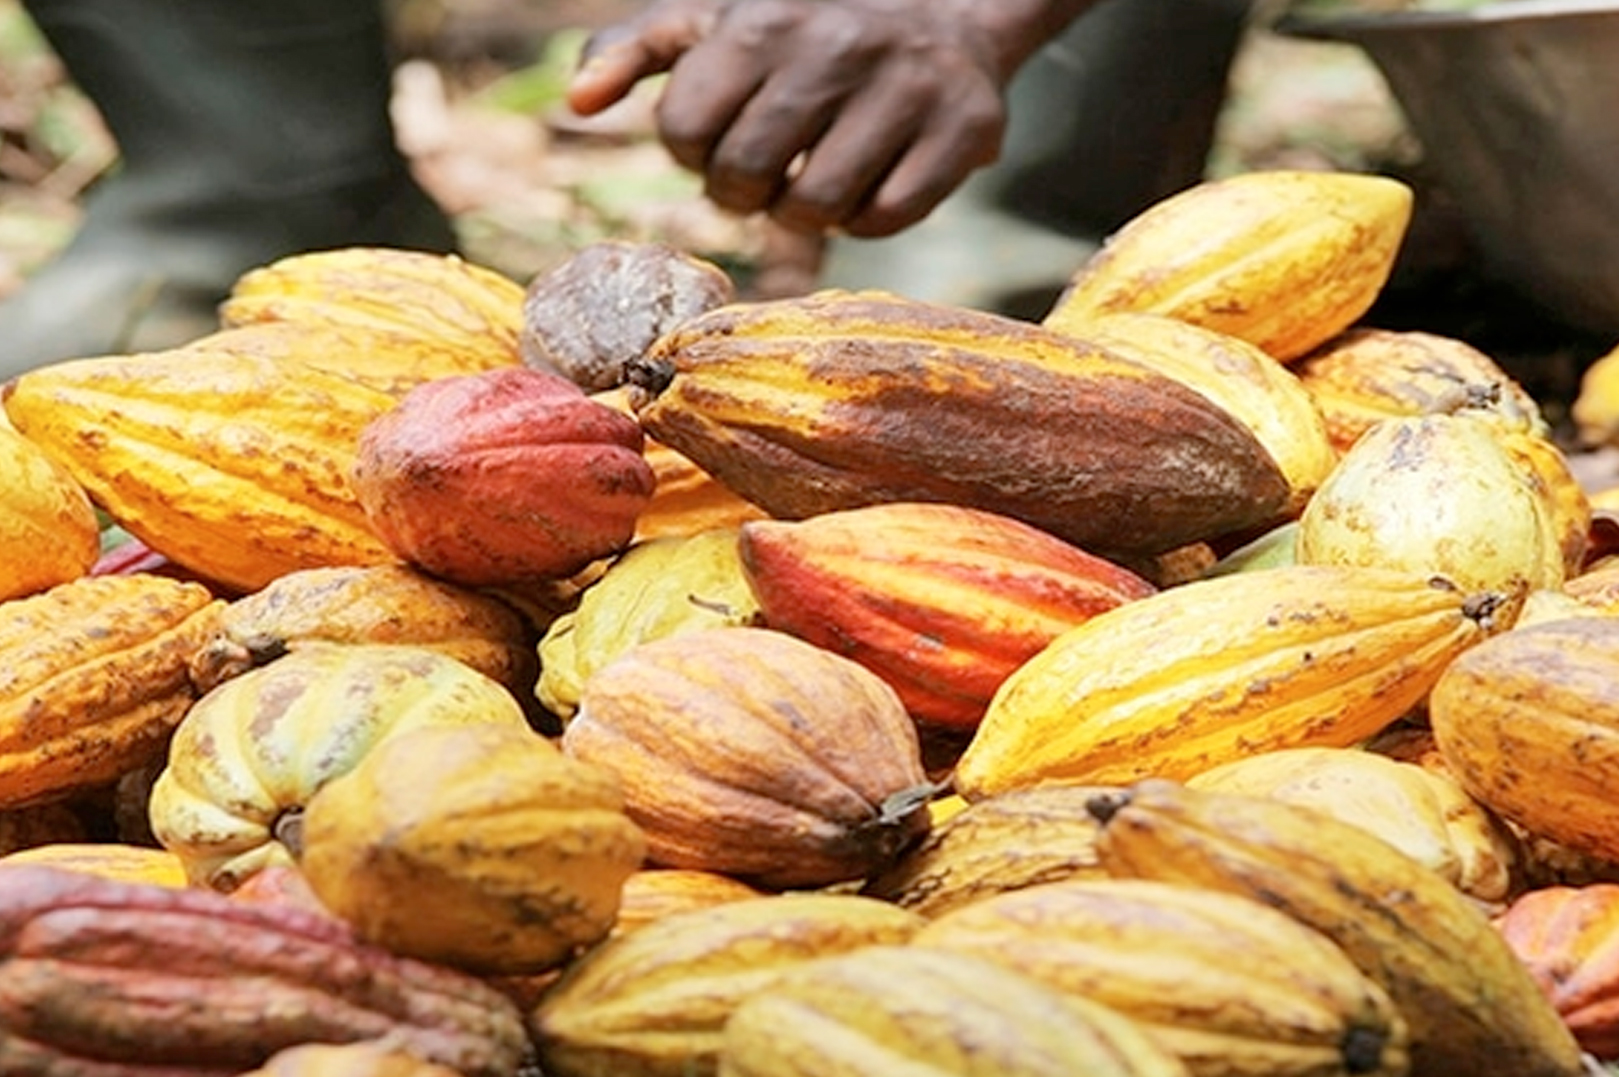 Cocoa Sector: Cooperatives Suspended, Coffee-Cocoa Council Reveals the Real Reasons